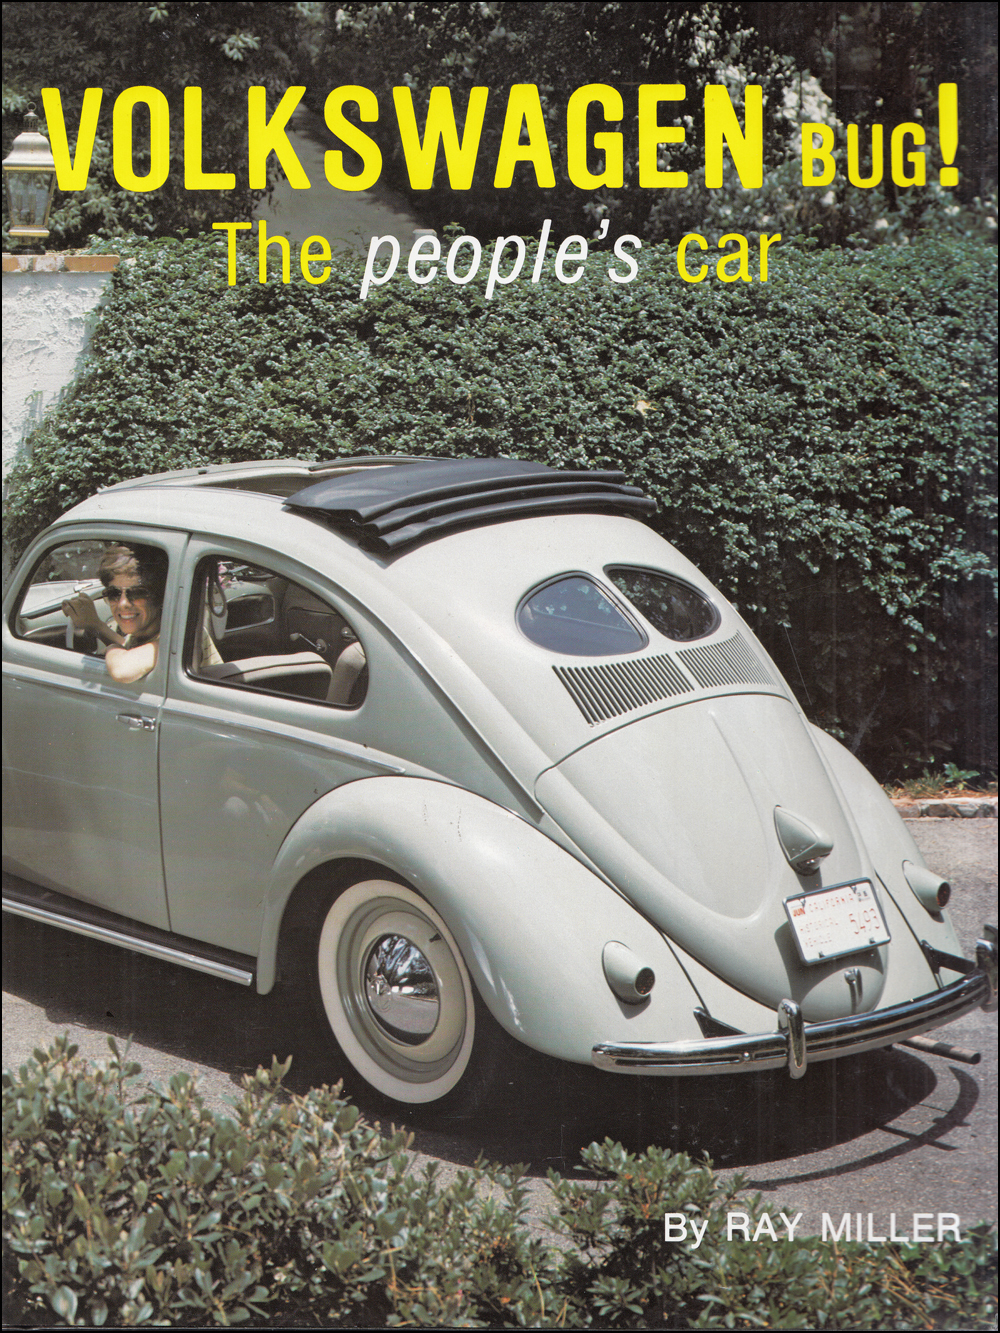 1943-1983 Volkswagen Bug!:  The People's Car History in 1100 photos